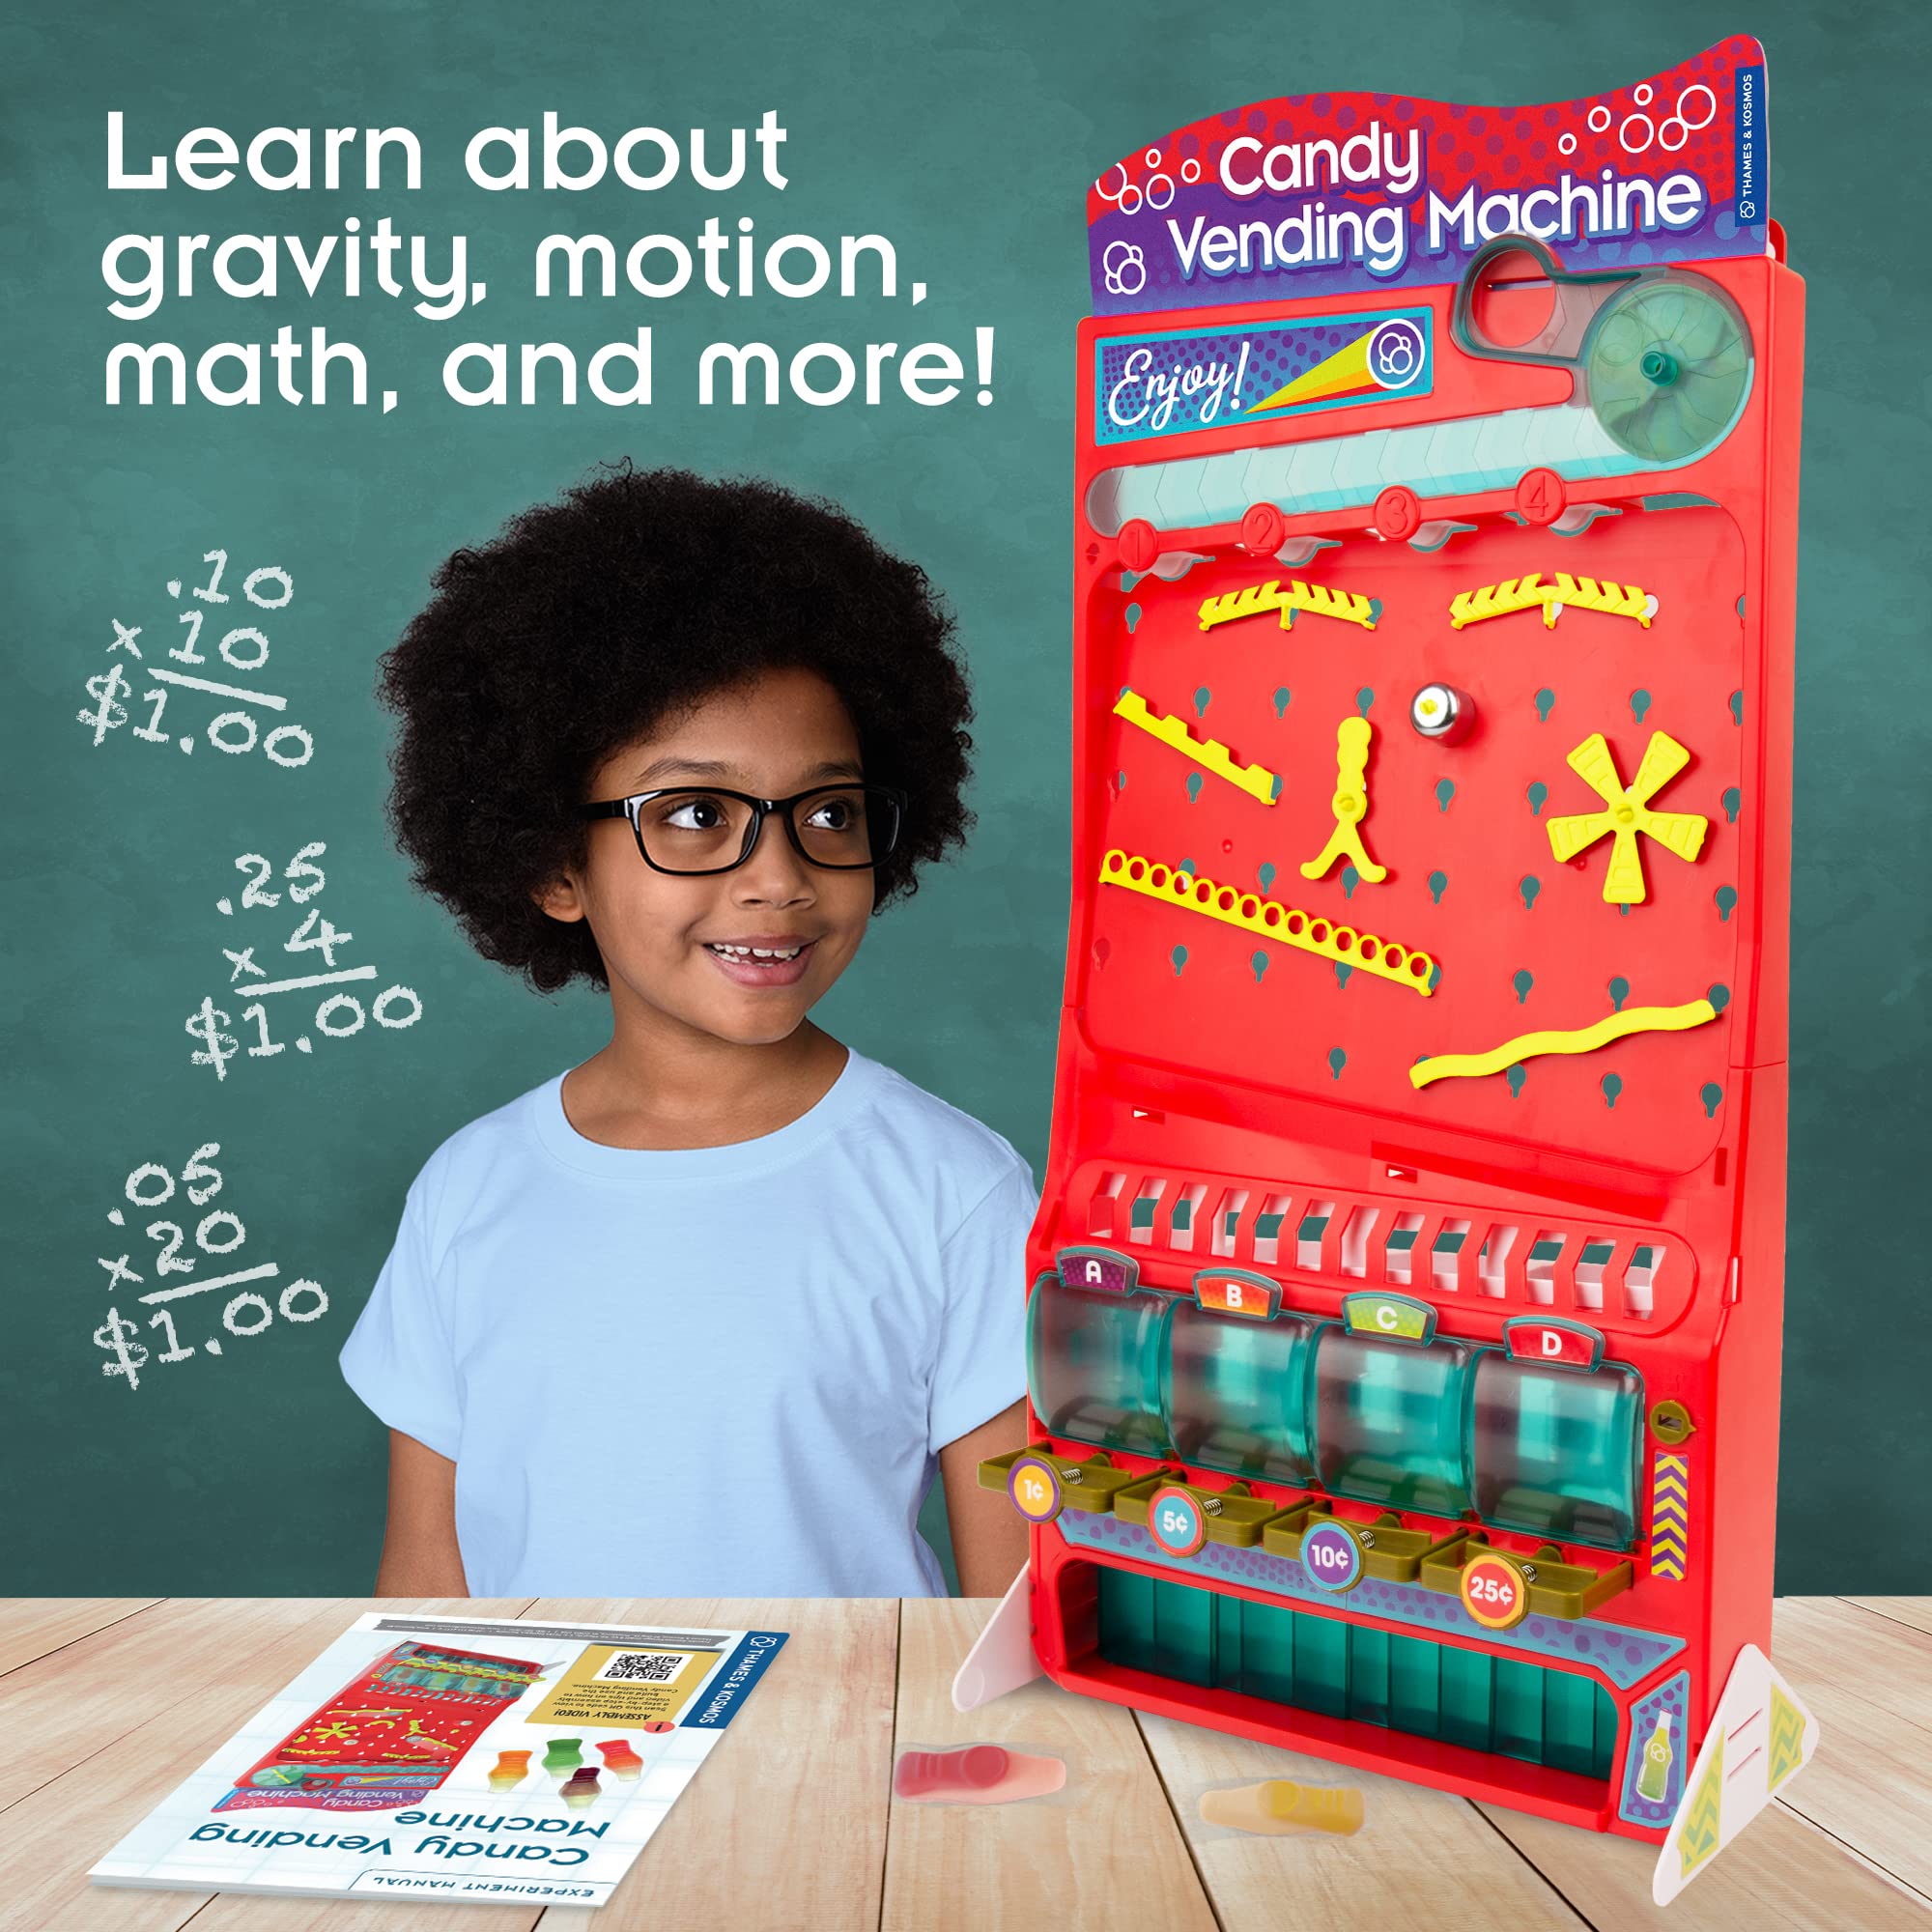 Thames & Kosmos Candy Vending Machine STEM Experiment Kit | Build a 2-ft Tall Toy Vending Machine | 10 Experiments with Gravity, Motion, Math | Coin Sorting Bank | Engineering & Math Lessons